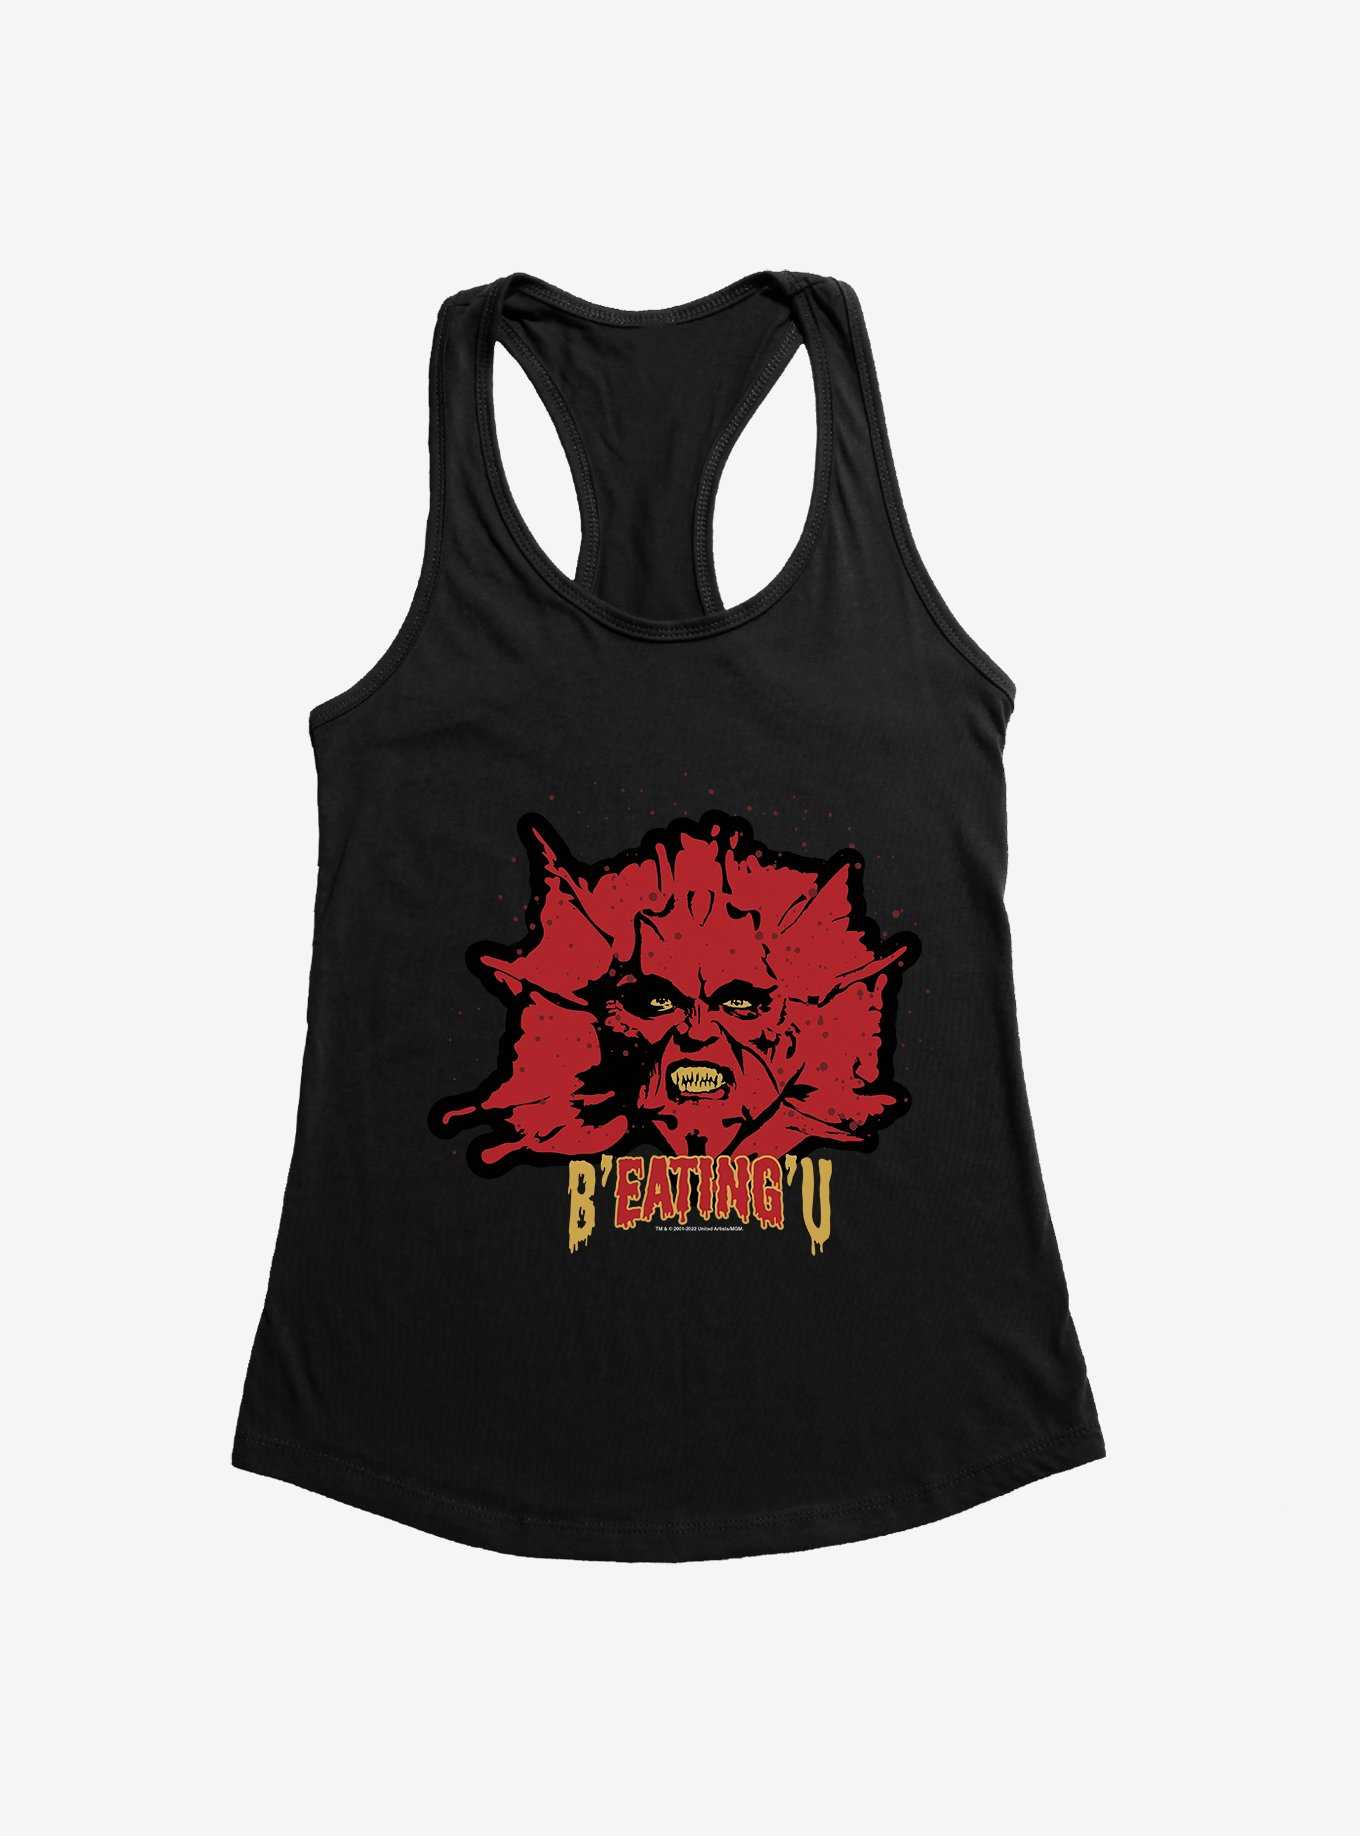 Jeepers Creepers B'Eating'U Girls Tank, , hi-res